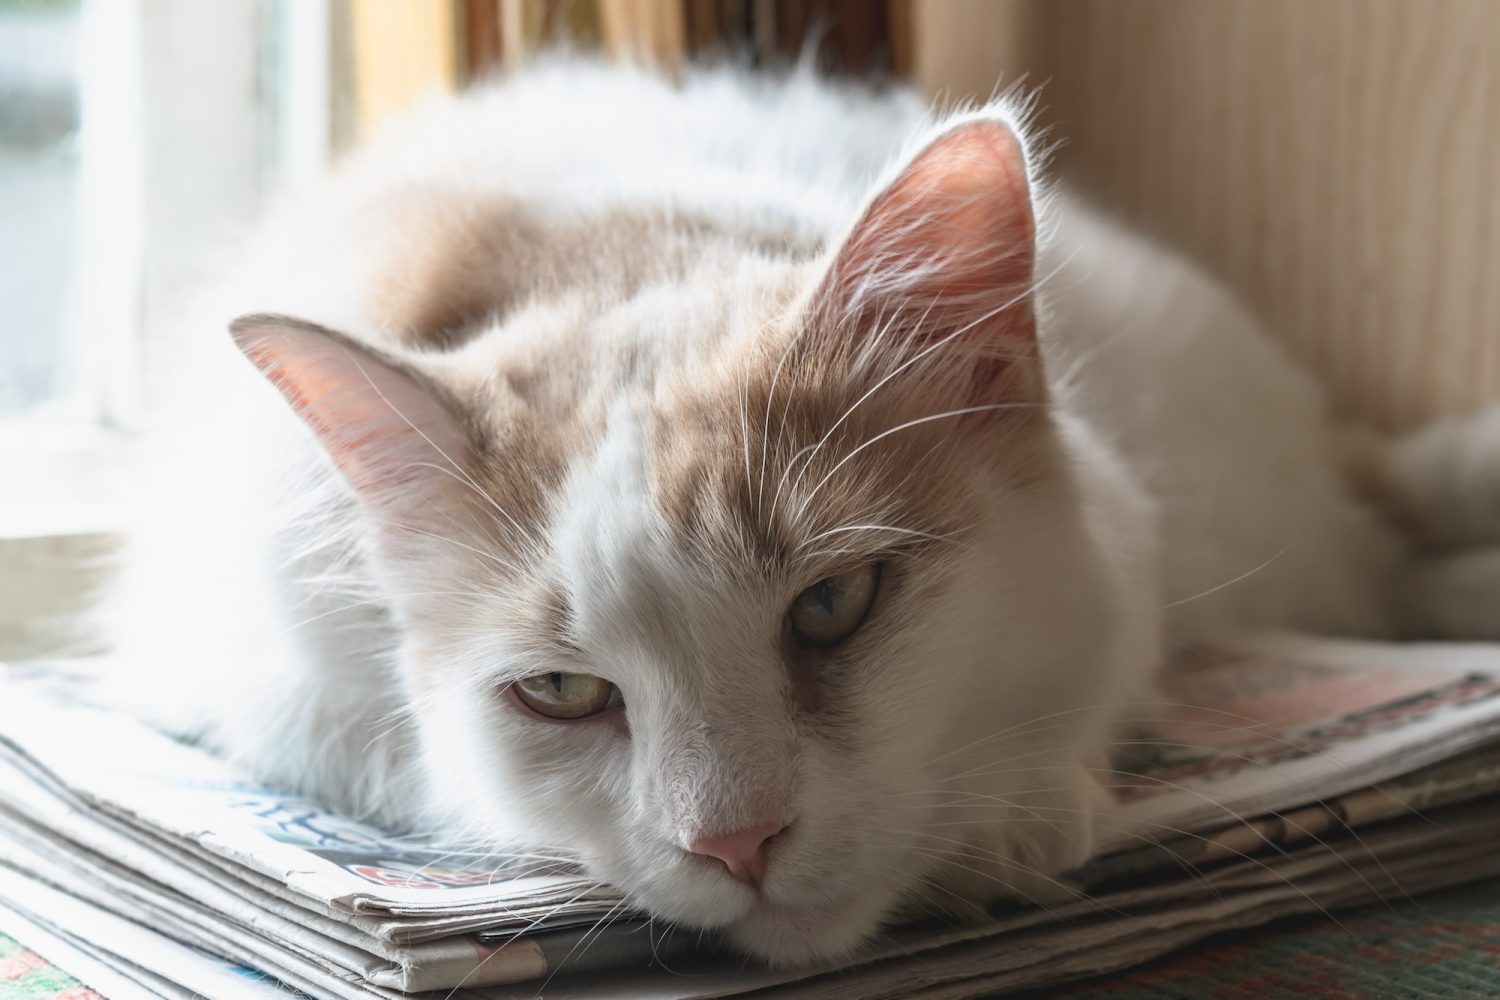 A long-haired white-red cat with sore eyes lies on newspapers on the windowsill.